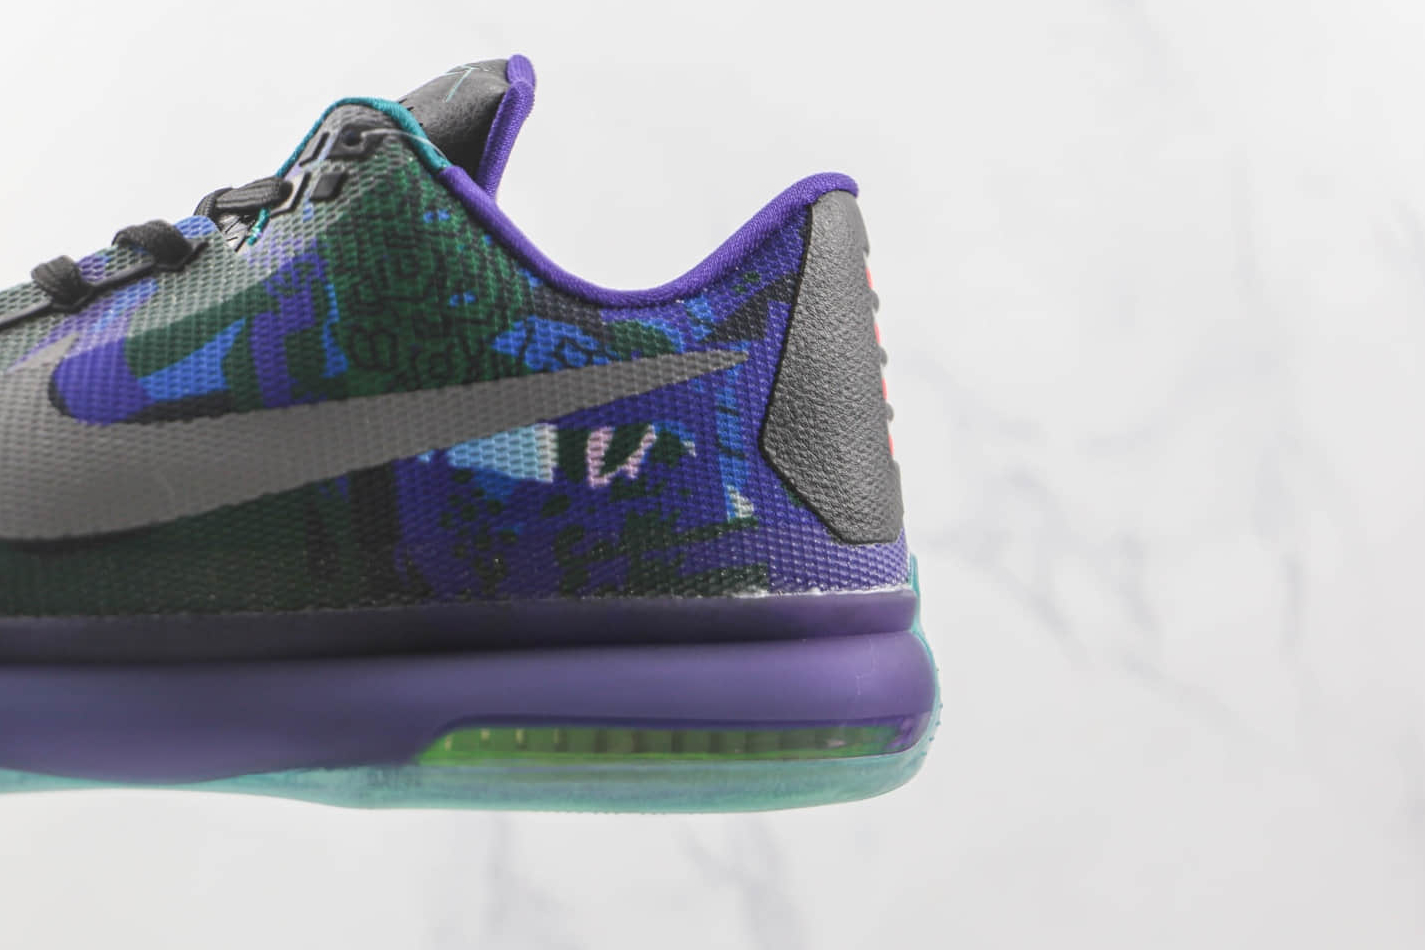 Nike Kobe 10 'Overcome' 705317-305 - Conquer Challenges with Style